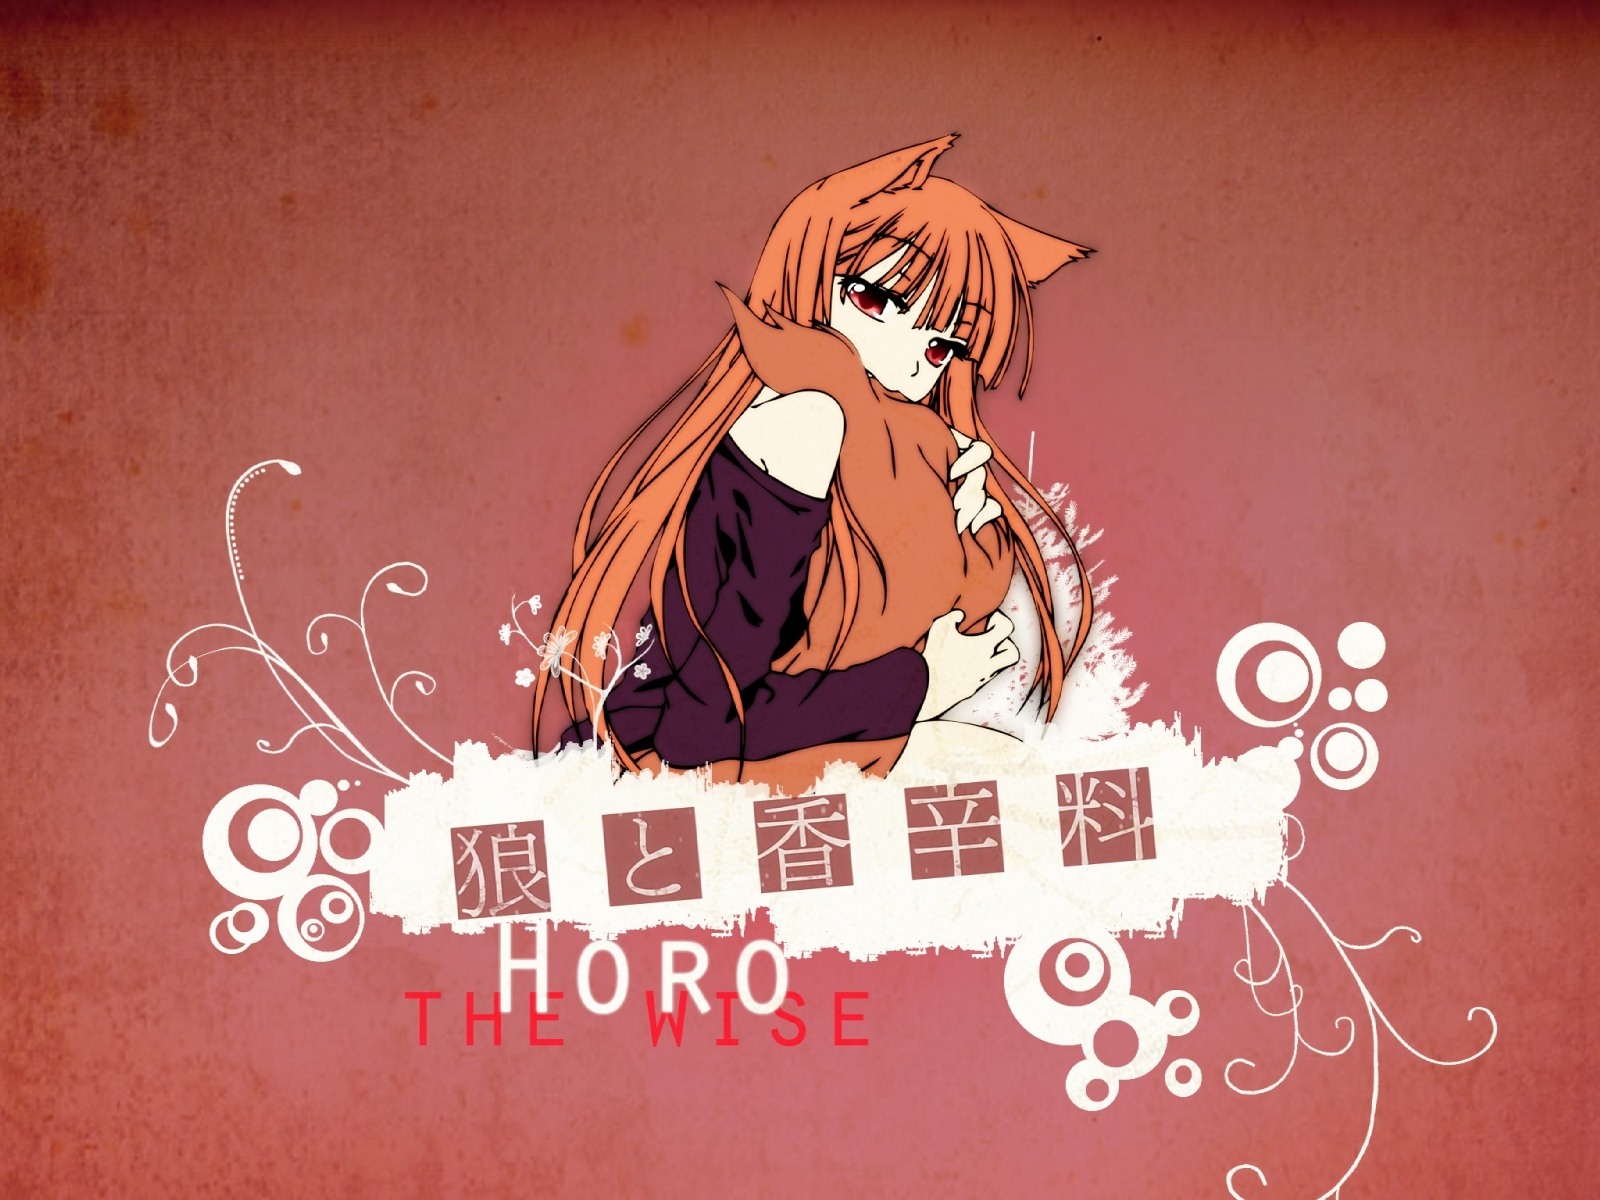 Spice and Wolf HD wallpapers #6 - 1600x1200